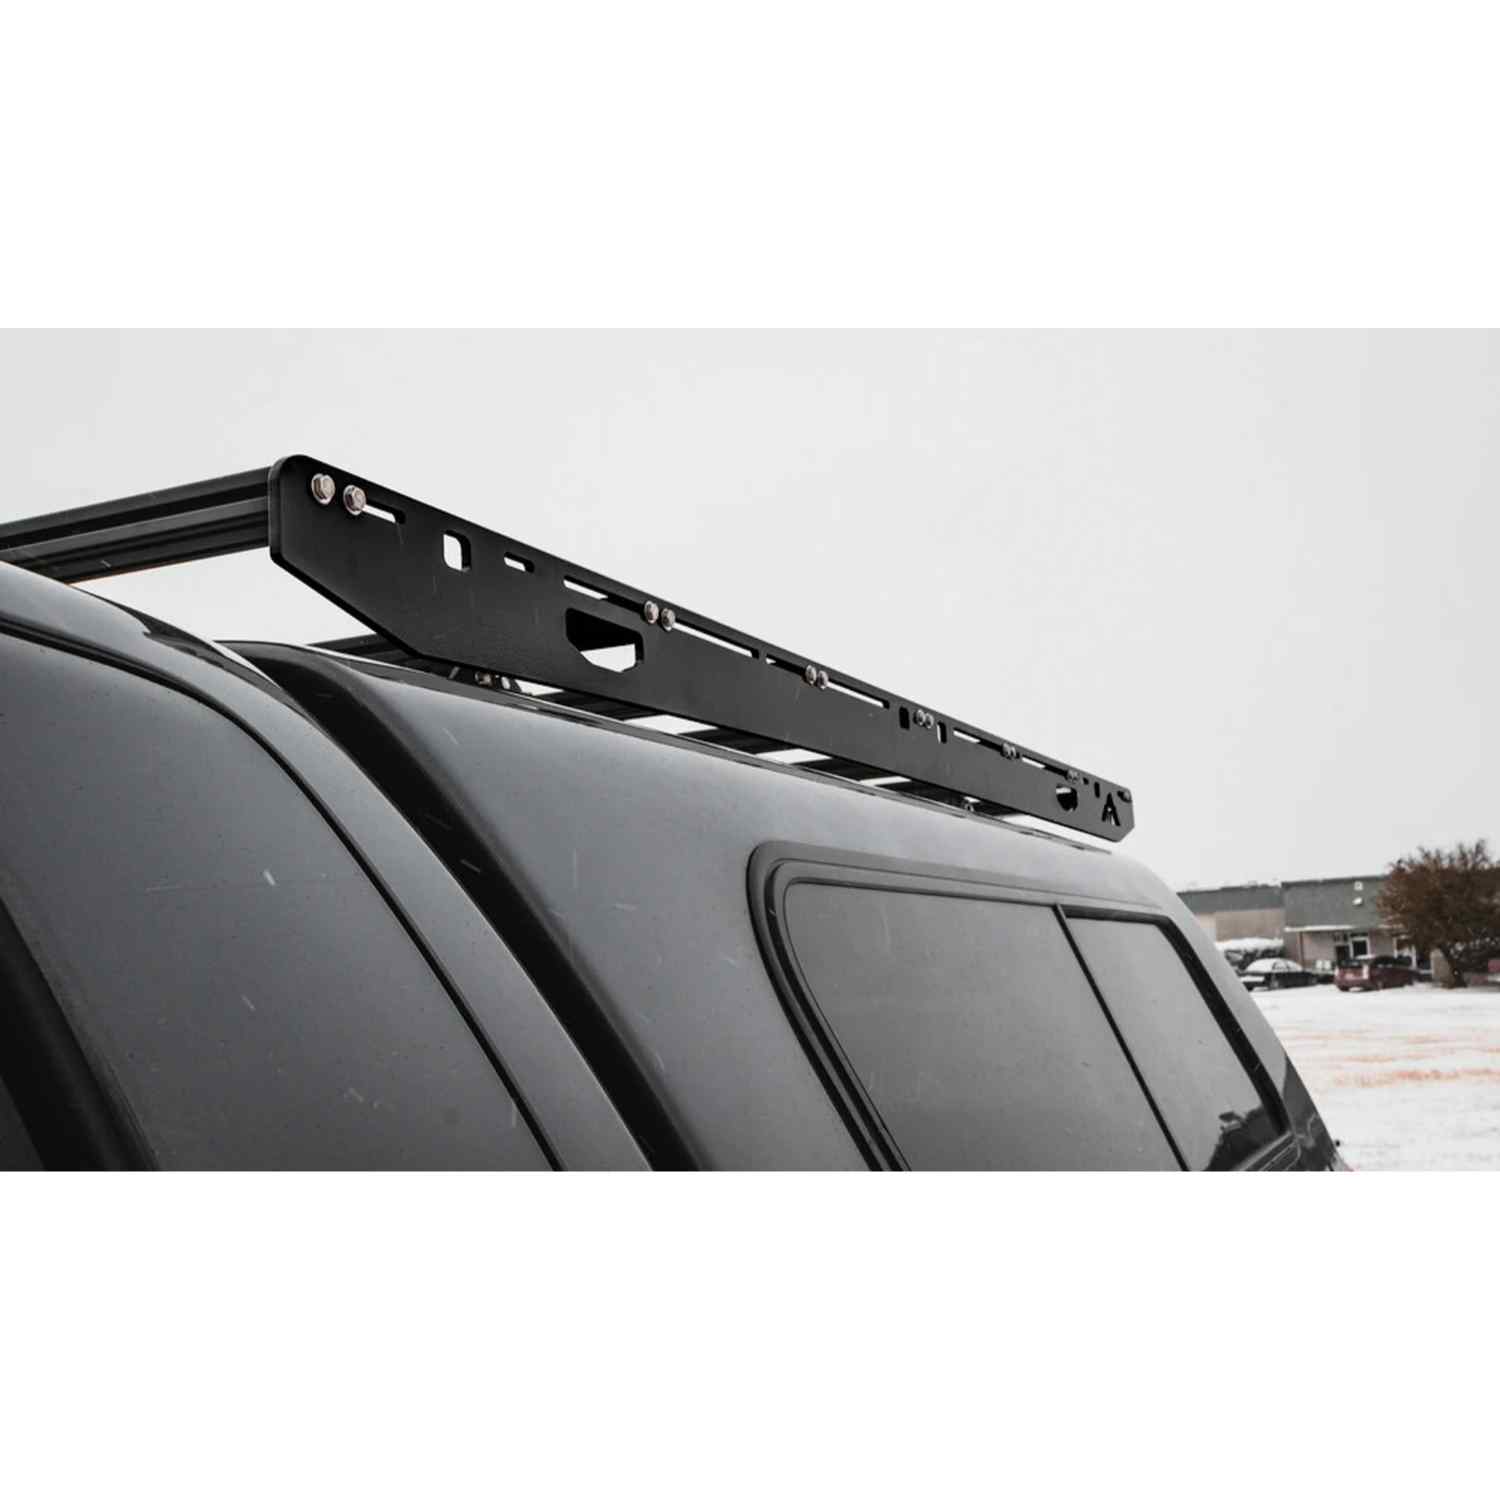 Sherpa Crow's Nest Universal Truck Topper Roof Rack Side View